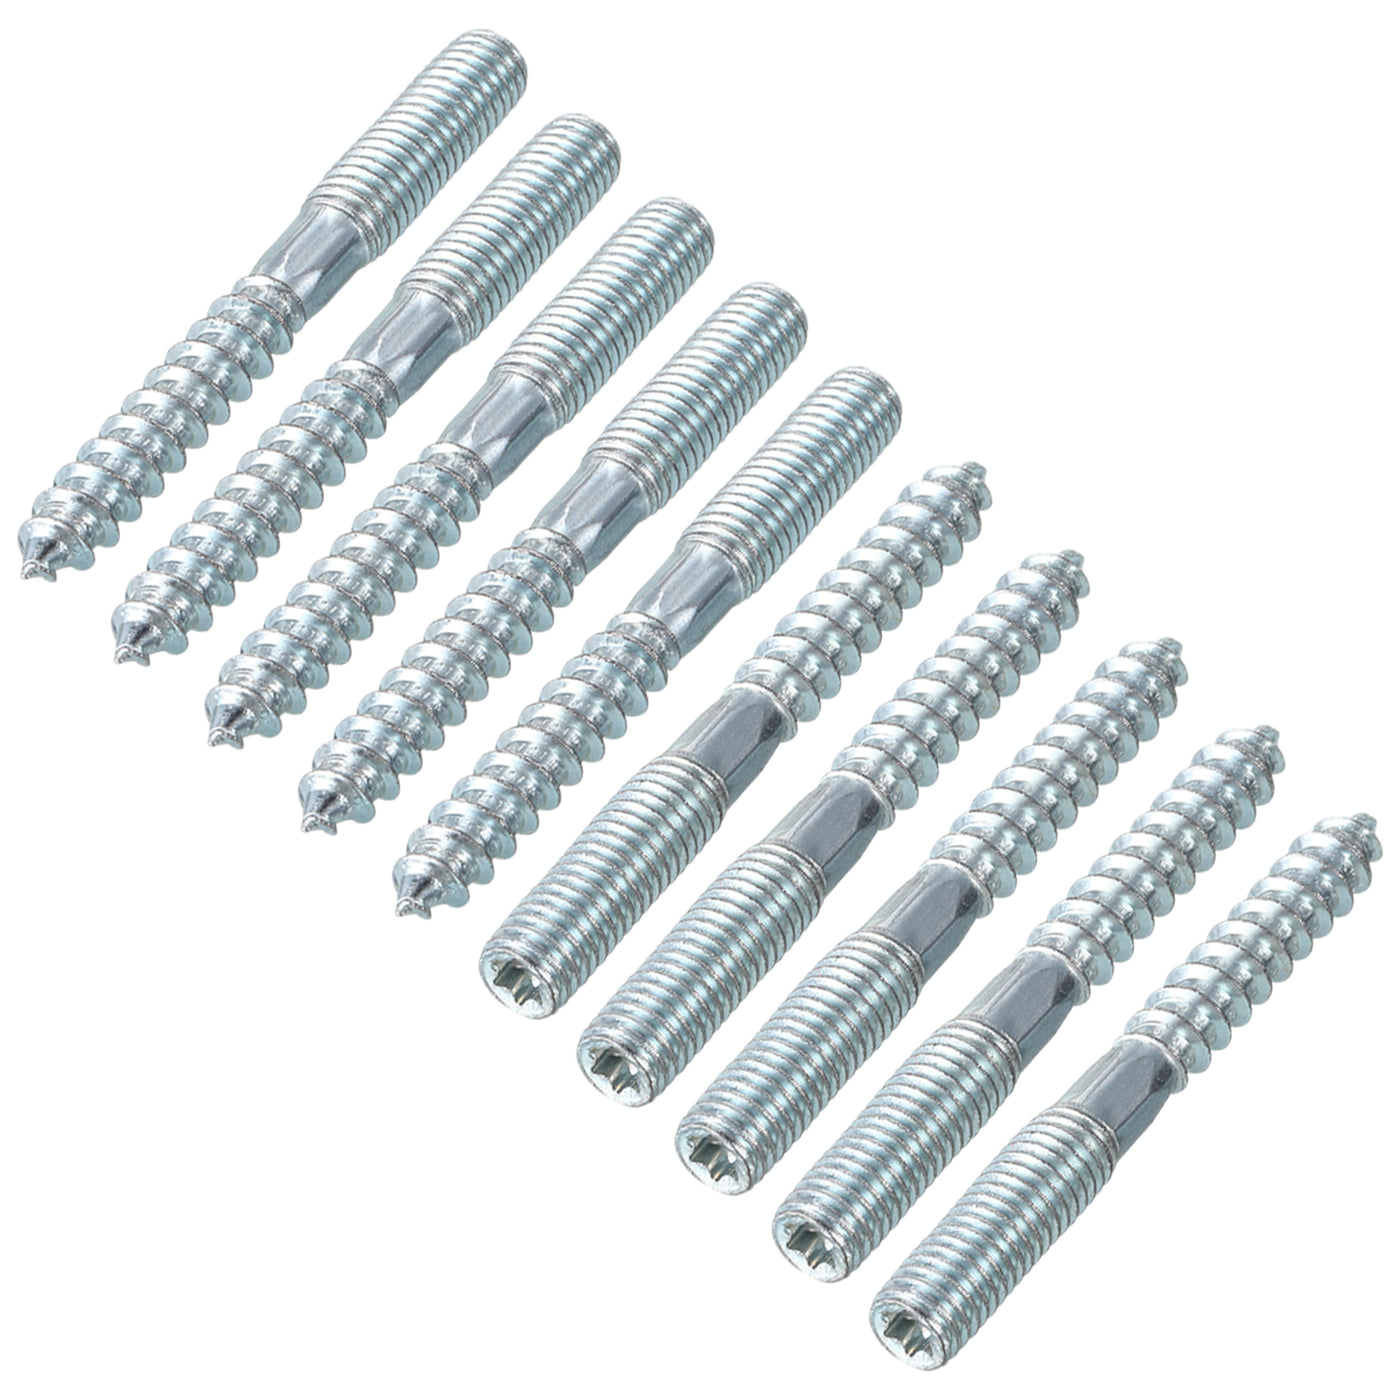 uxcell Uxcell 16Pcs M8x70mm Hanger Bolt Double Headed Bolt Self-Tapping Screw for Furniture